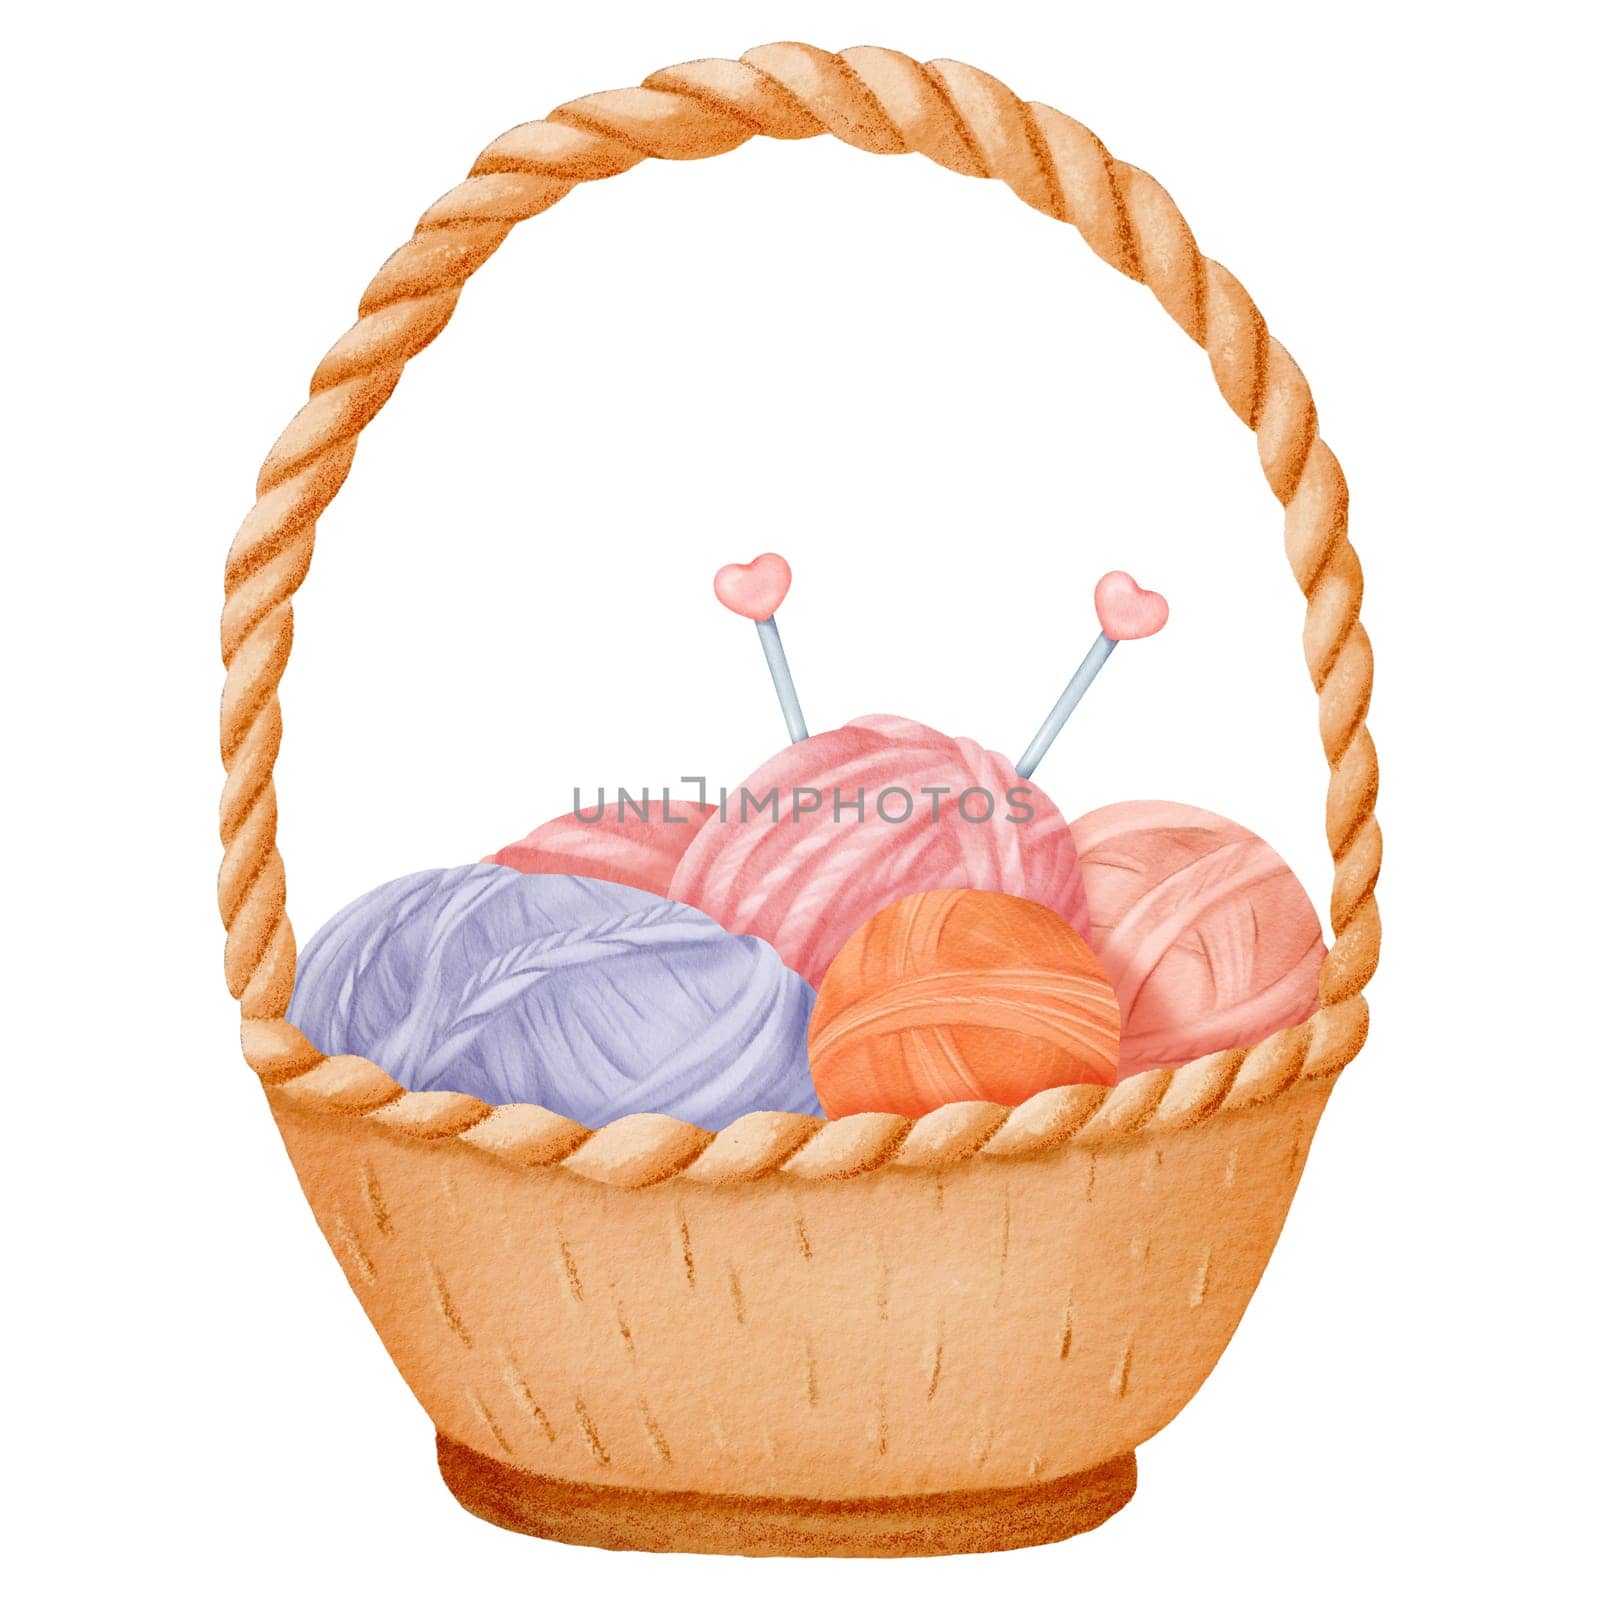 A cozy composition featuring a woven basket filled with colorful yarn skeins and knitting needles. Perfect for crafting blogs, cozy home decor designs, or DIY-themed projects. Watercolor illustration.